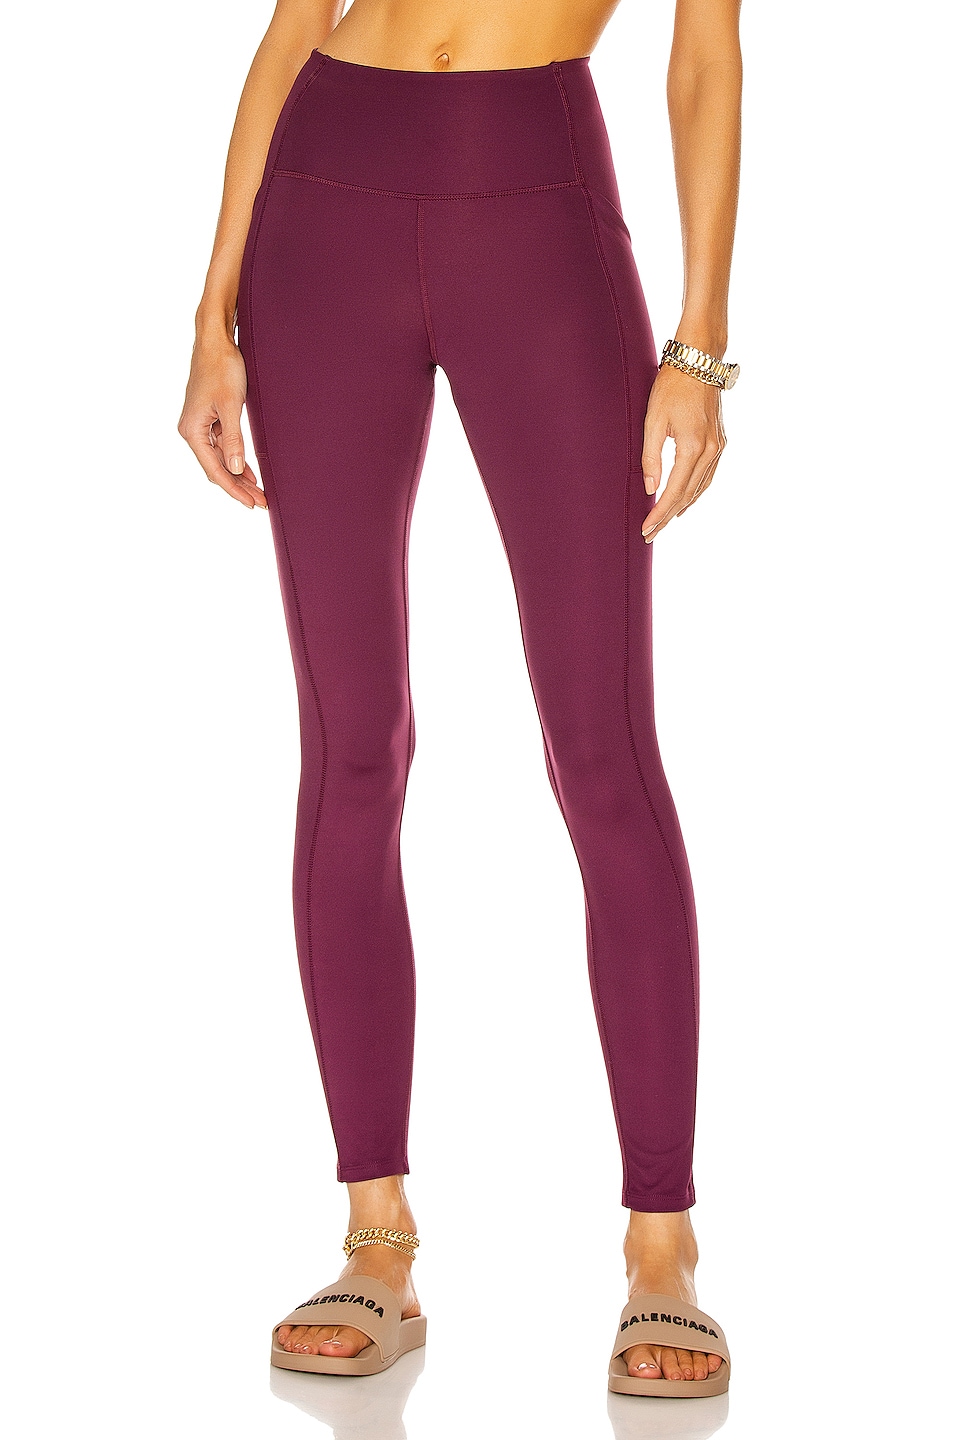 Image 1 of Girlfriend Collective High-Rise Pocket Legging in Plum